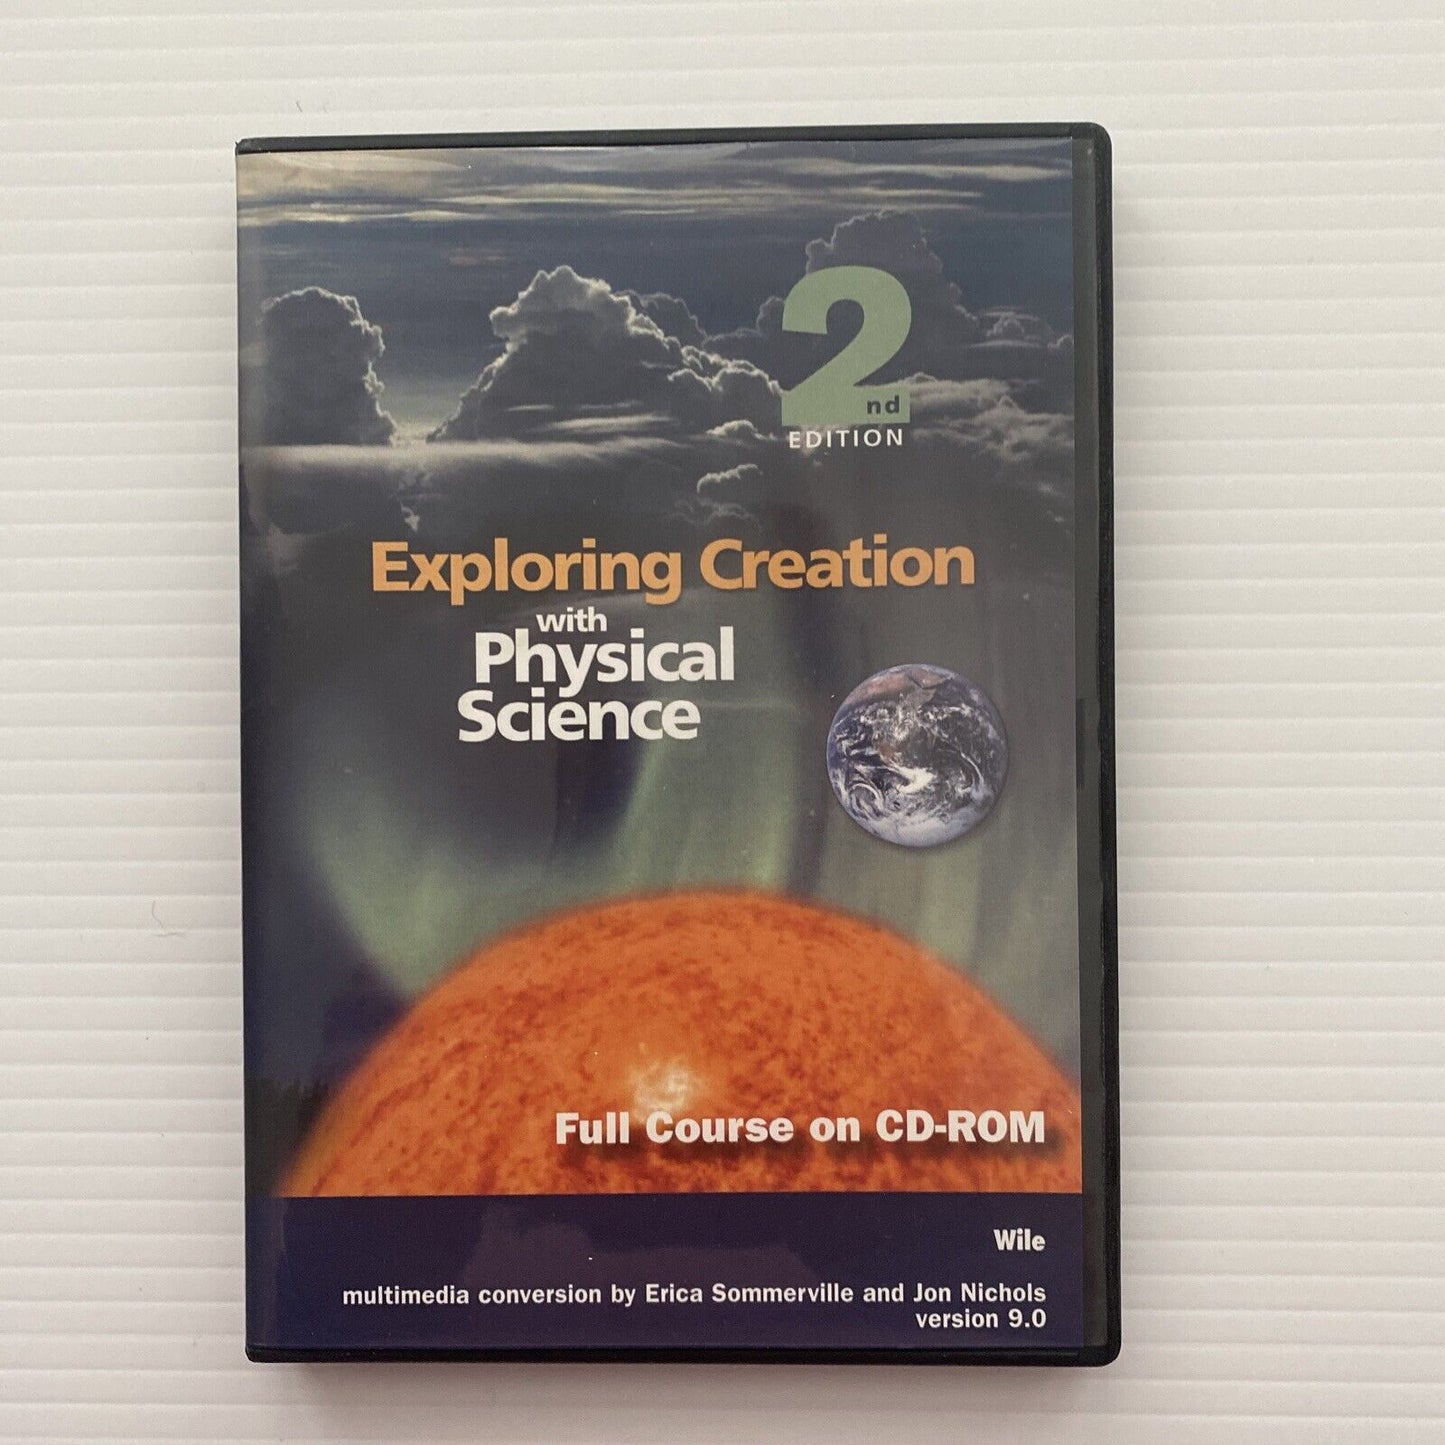 Exploring Creation with Physical Science 2nd Edition - Full Course CD